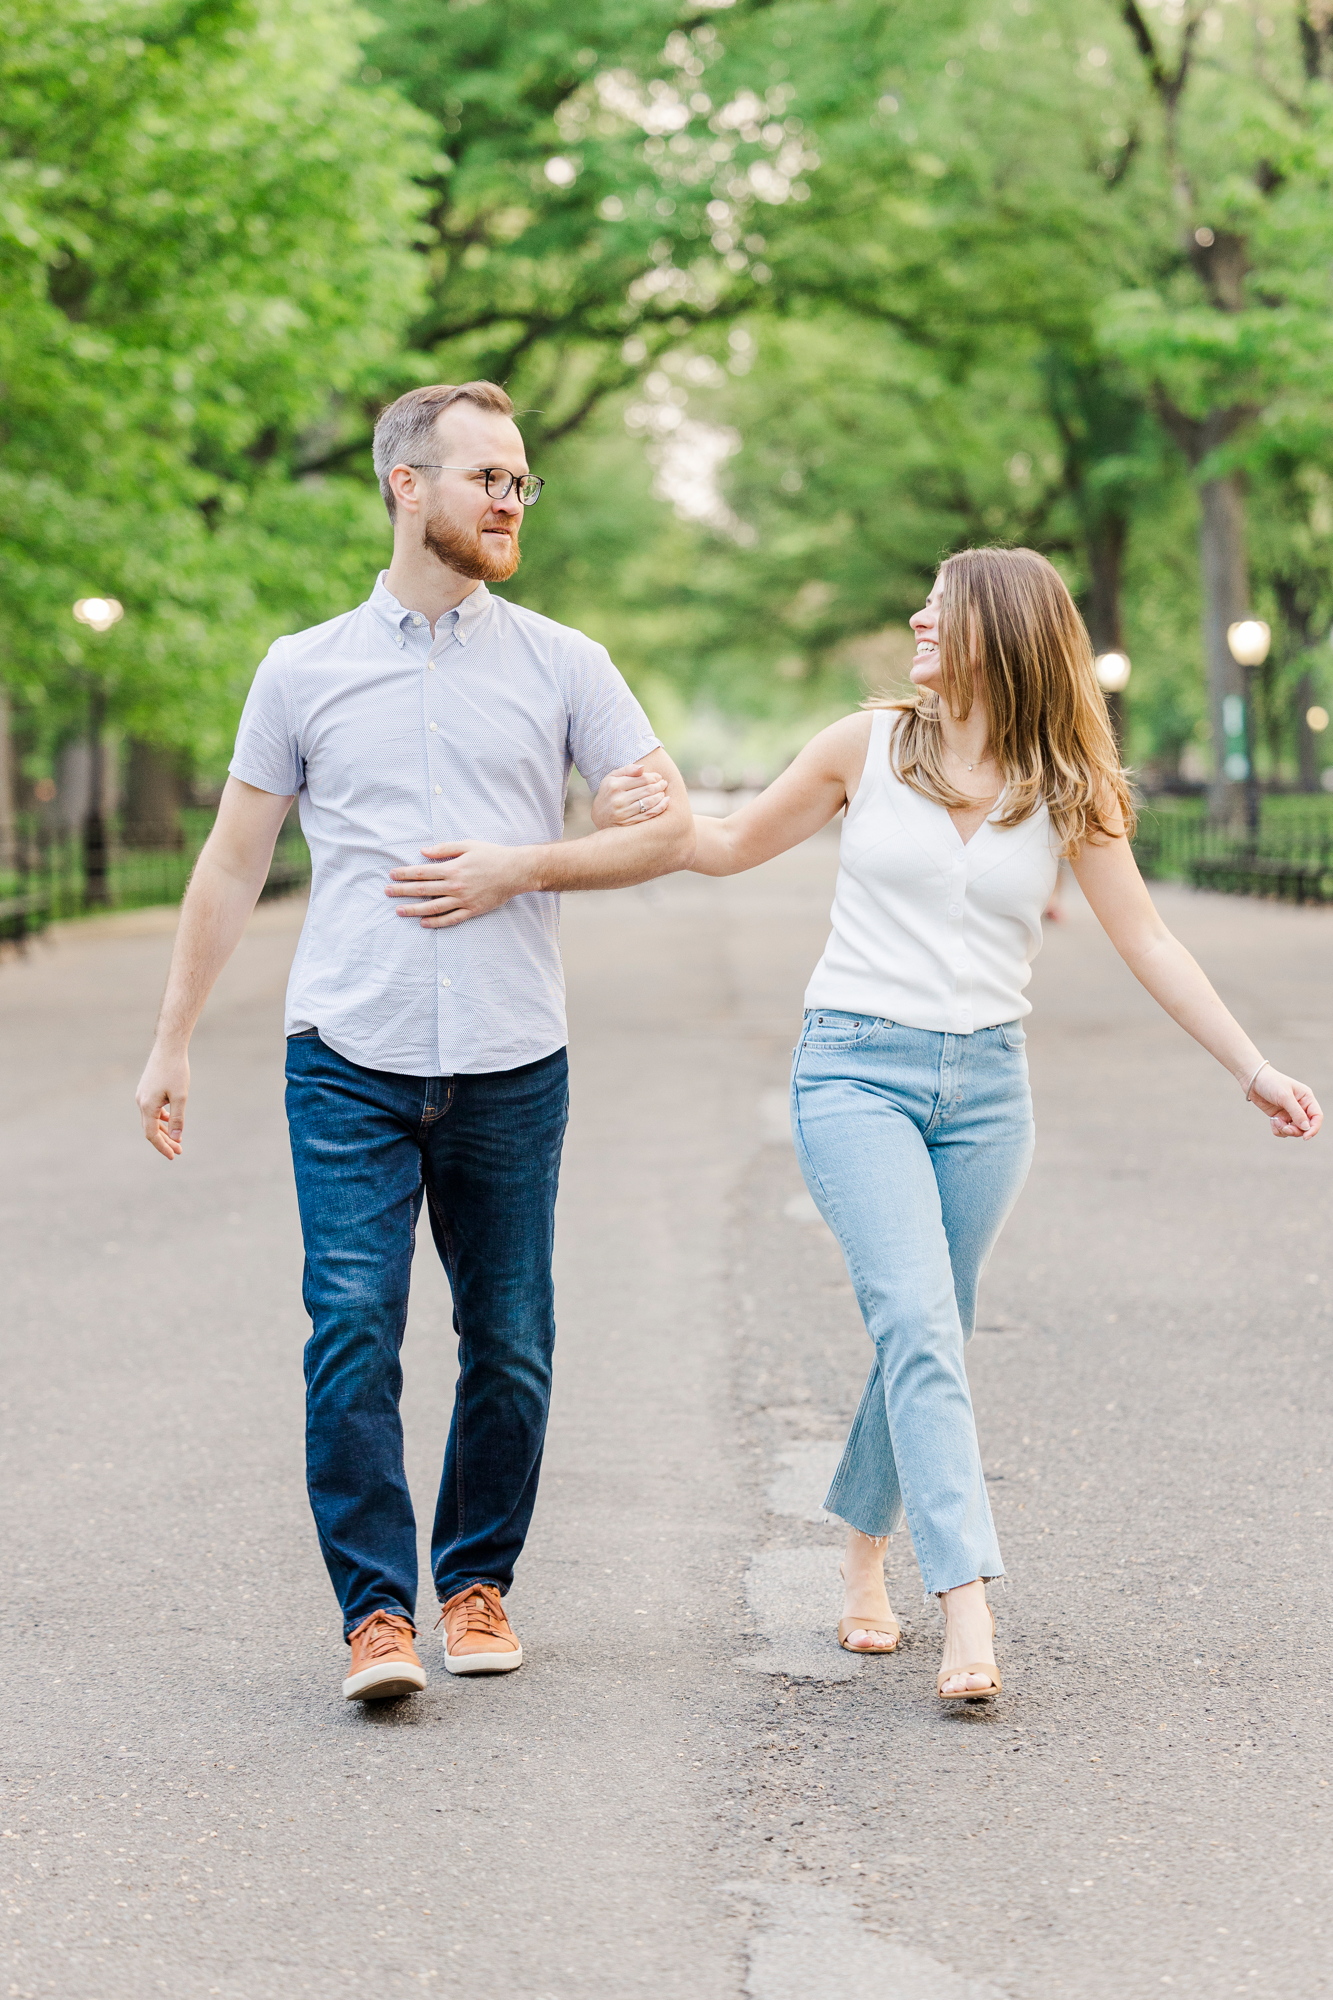 Awesome Central Park Engagement Shoot